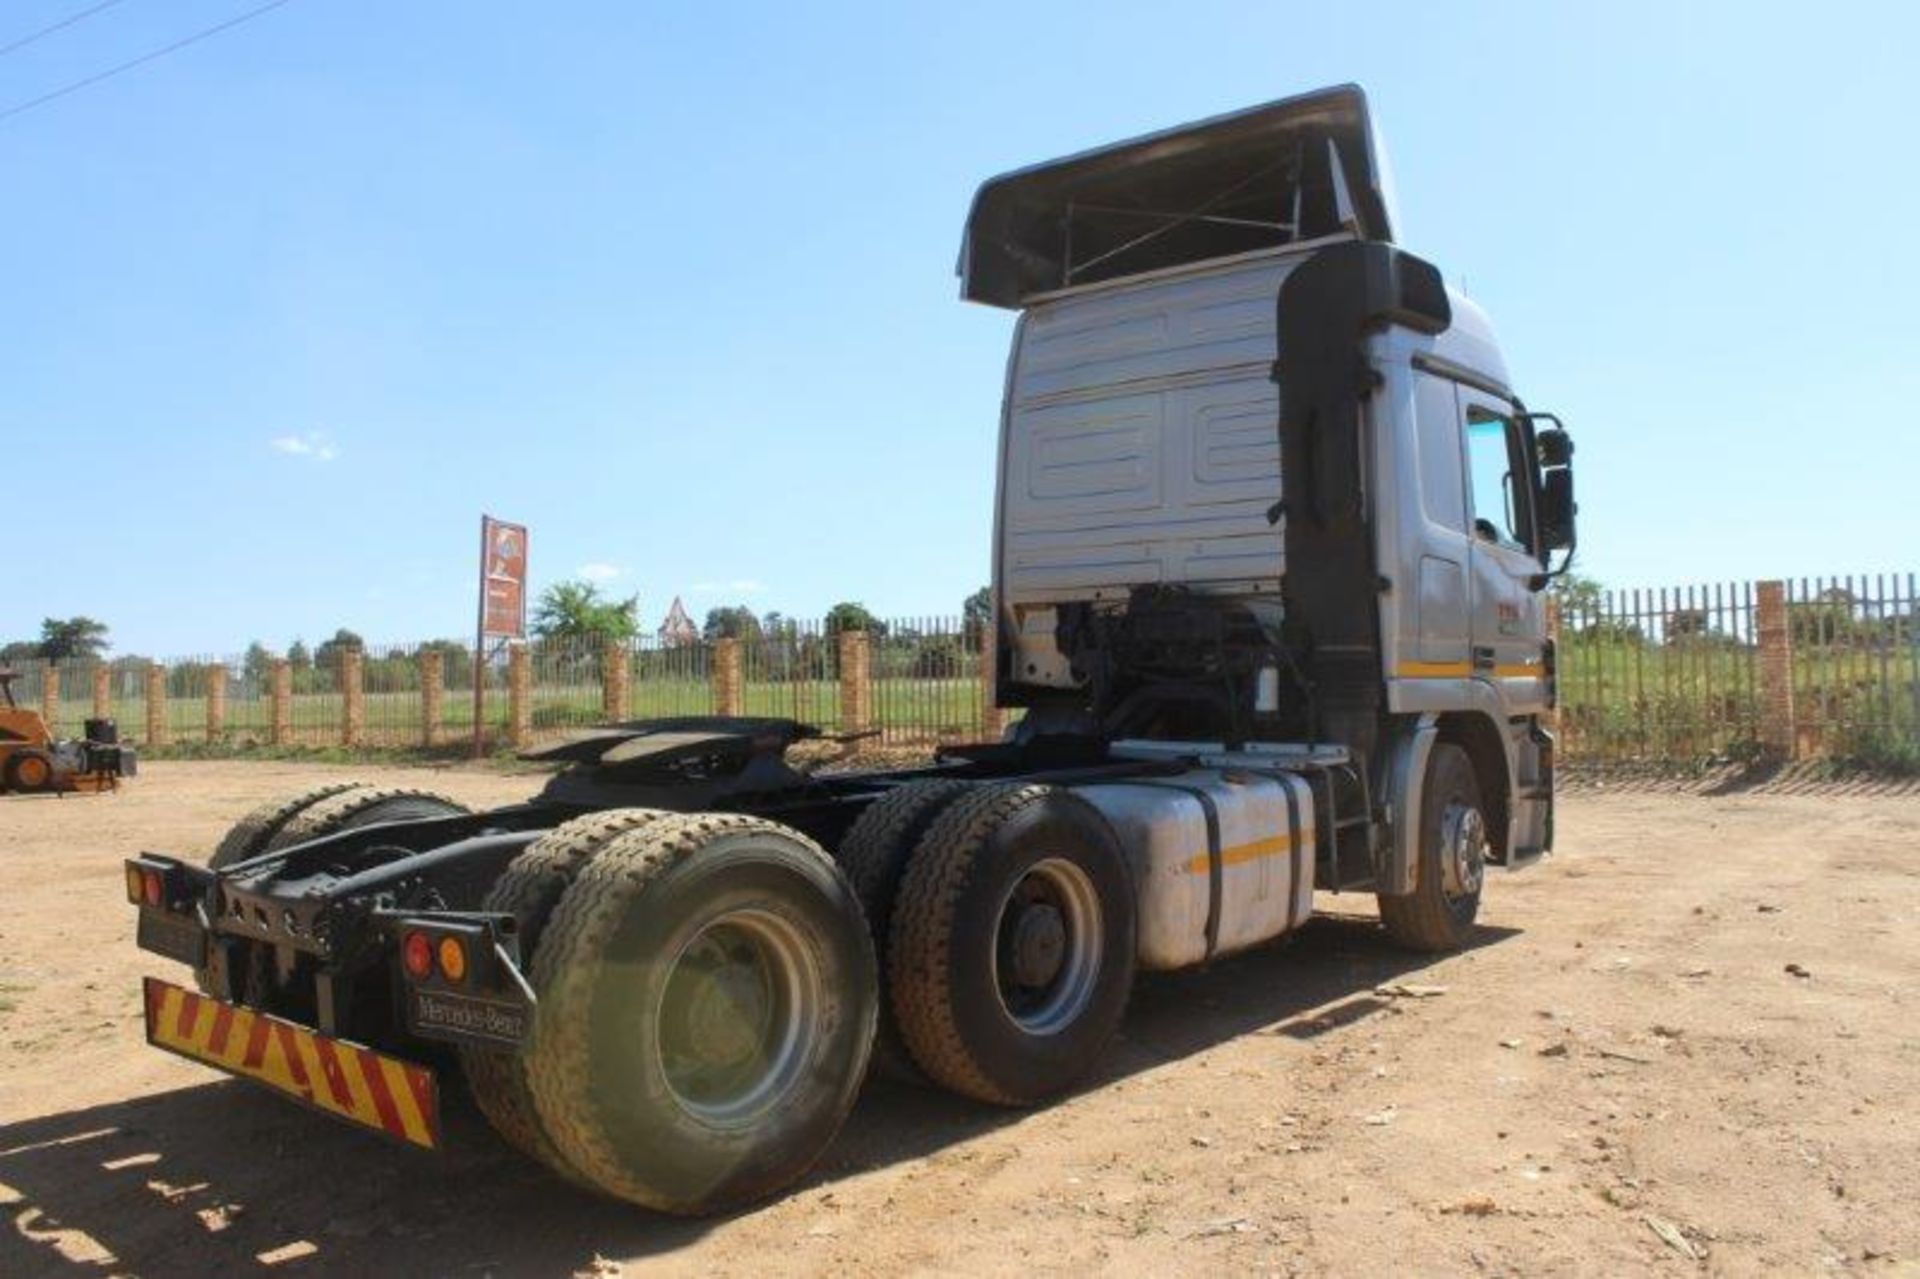 2005 M/BENZ 2640 ACTROS DOUBLE AXLE - Image 4 of 8